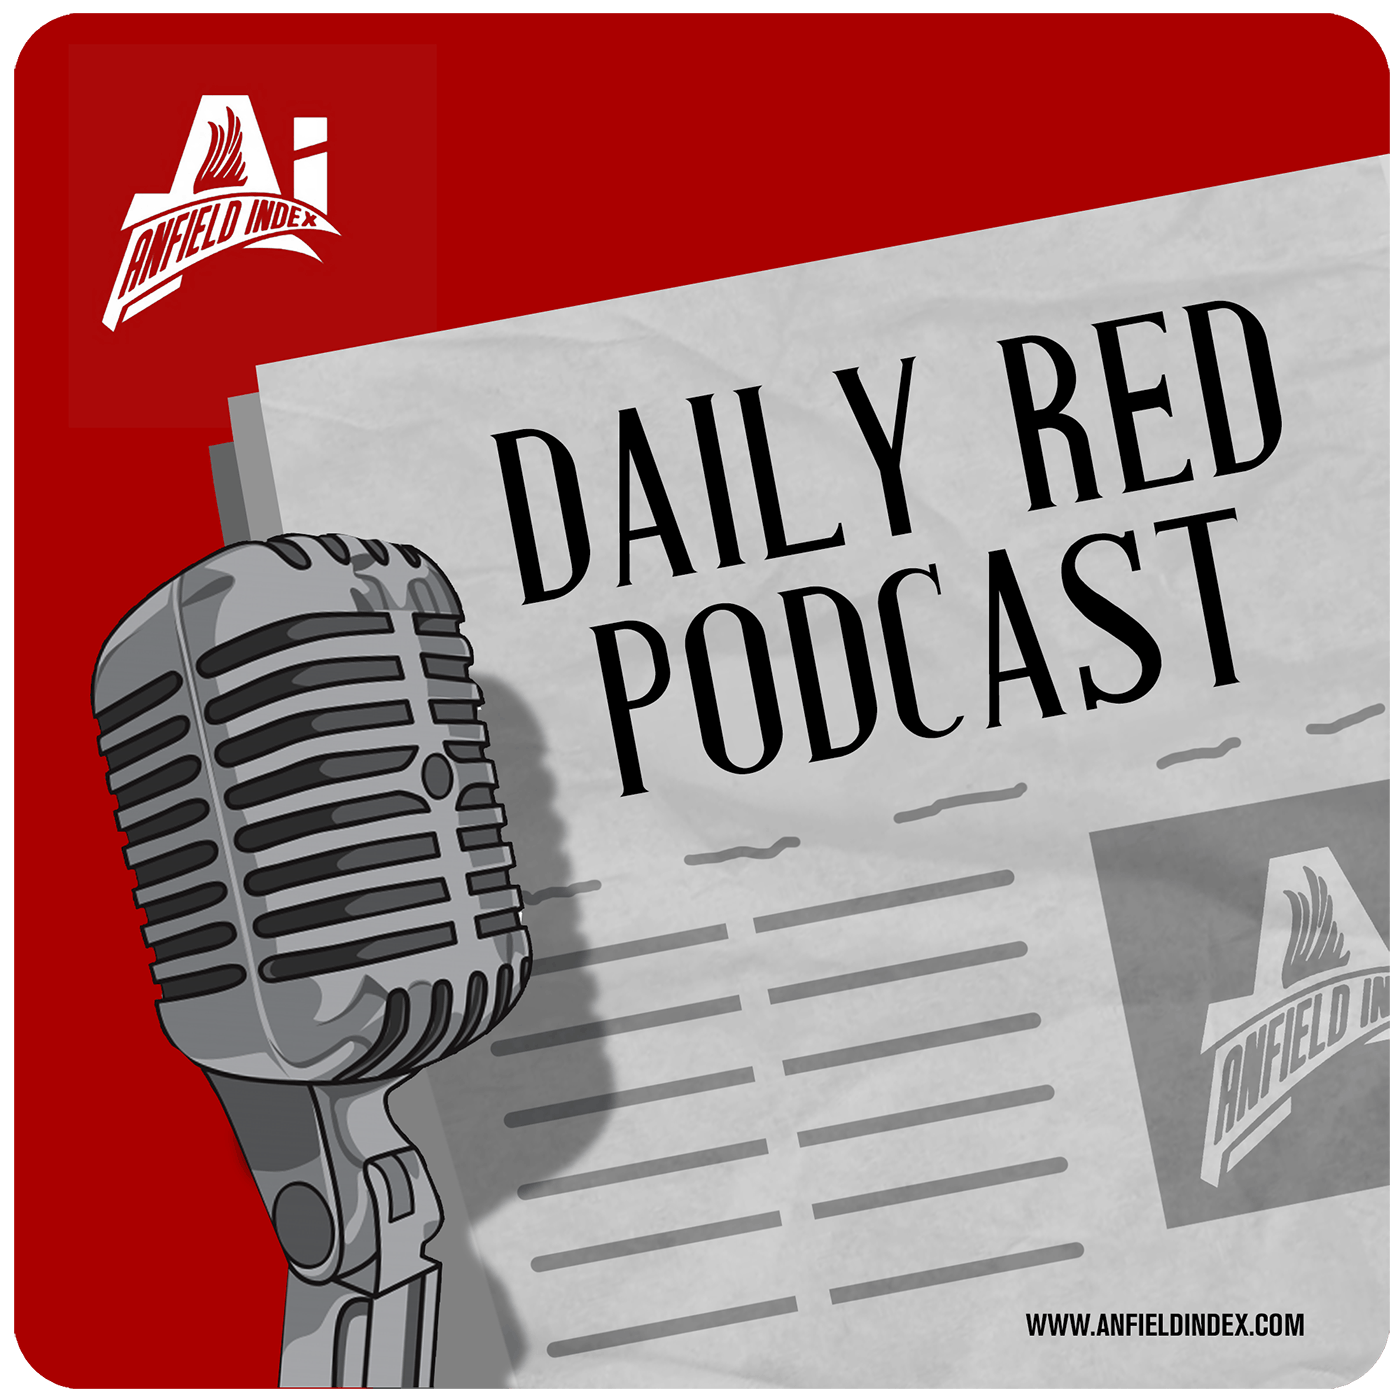 Transfer Rejected: Daily Red Podcast